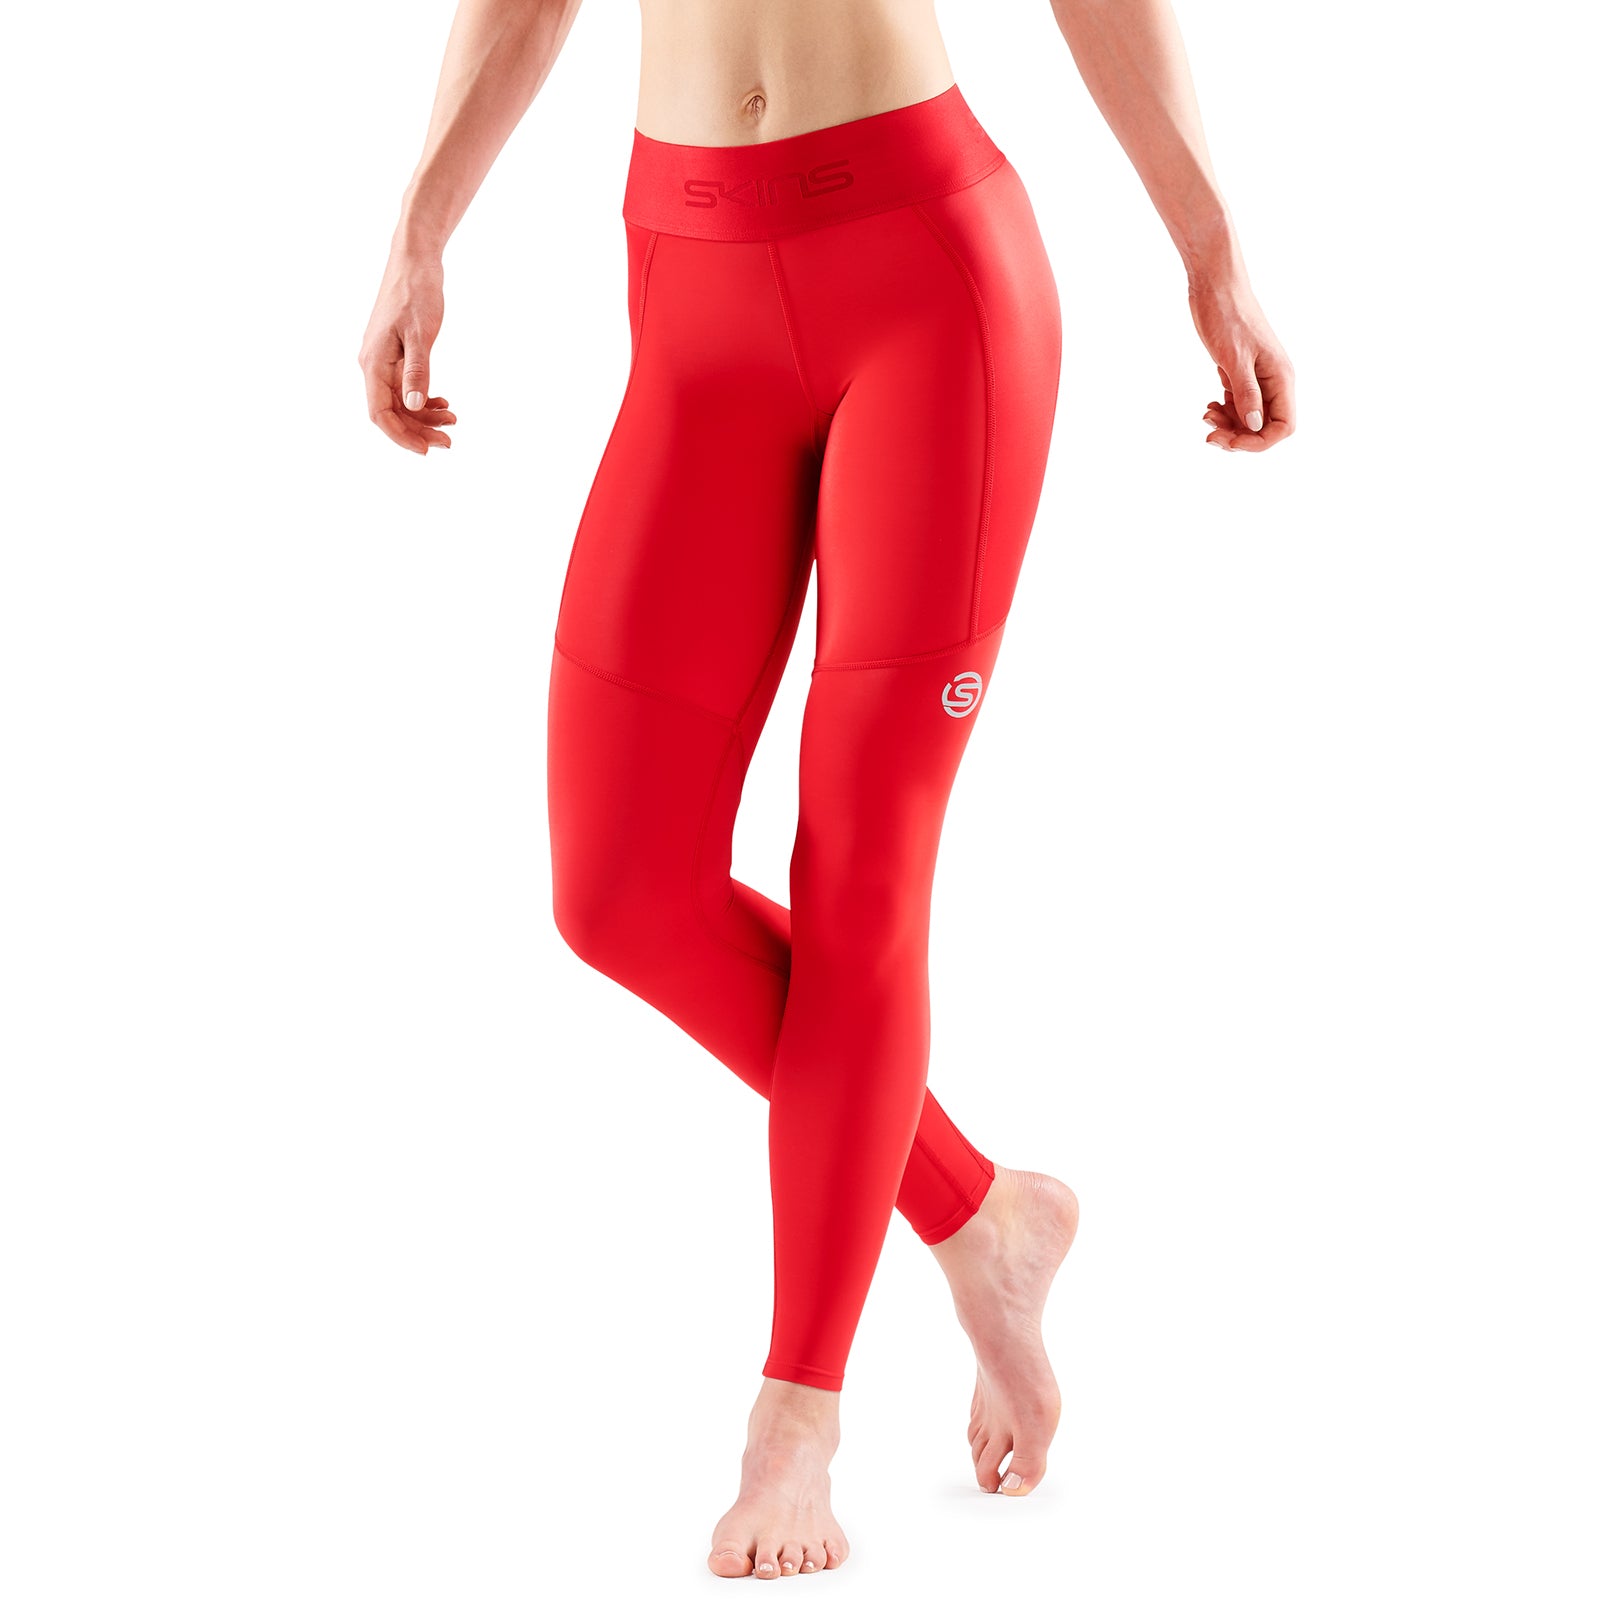 SKINS SERIES-3 Women's Thermal Long Tights Red